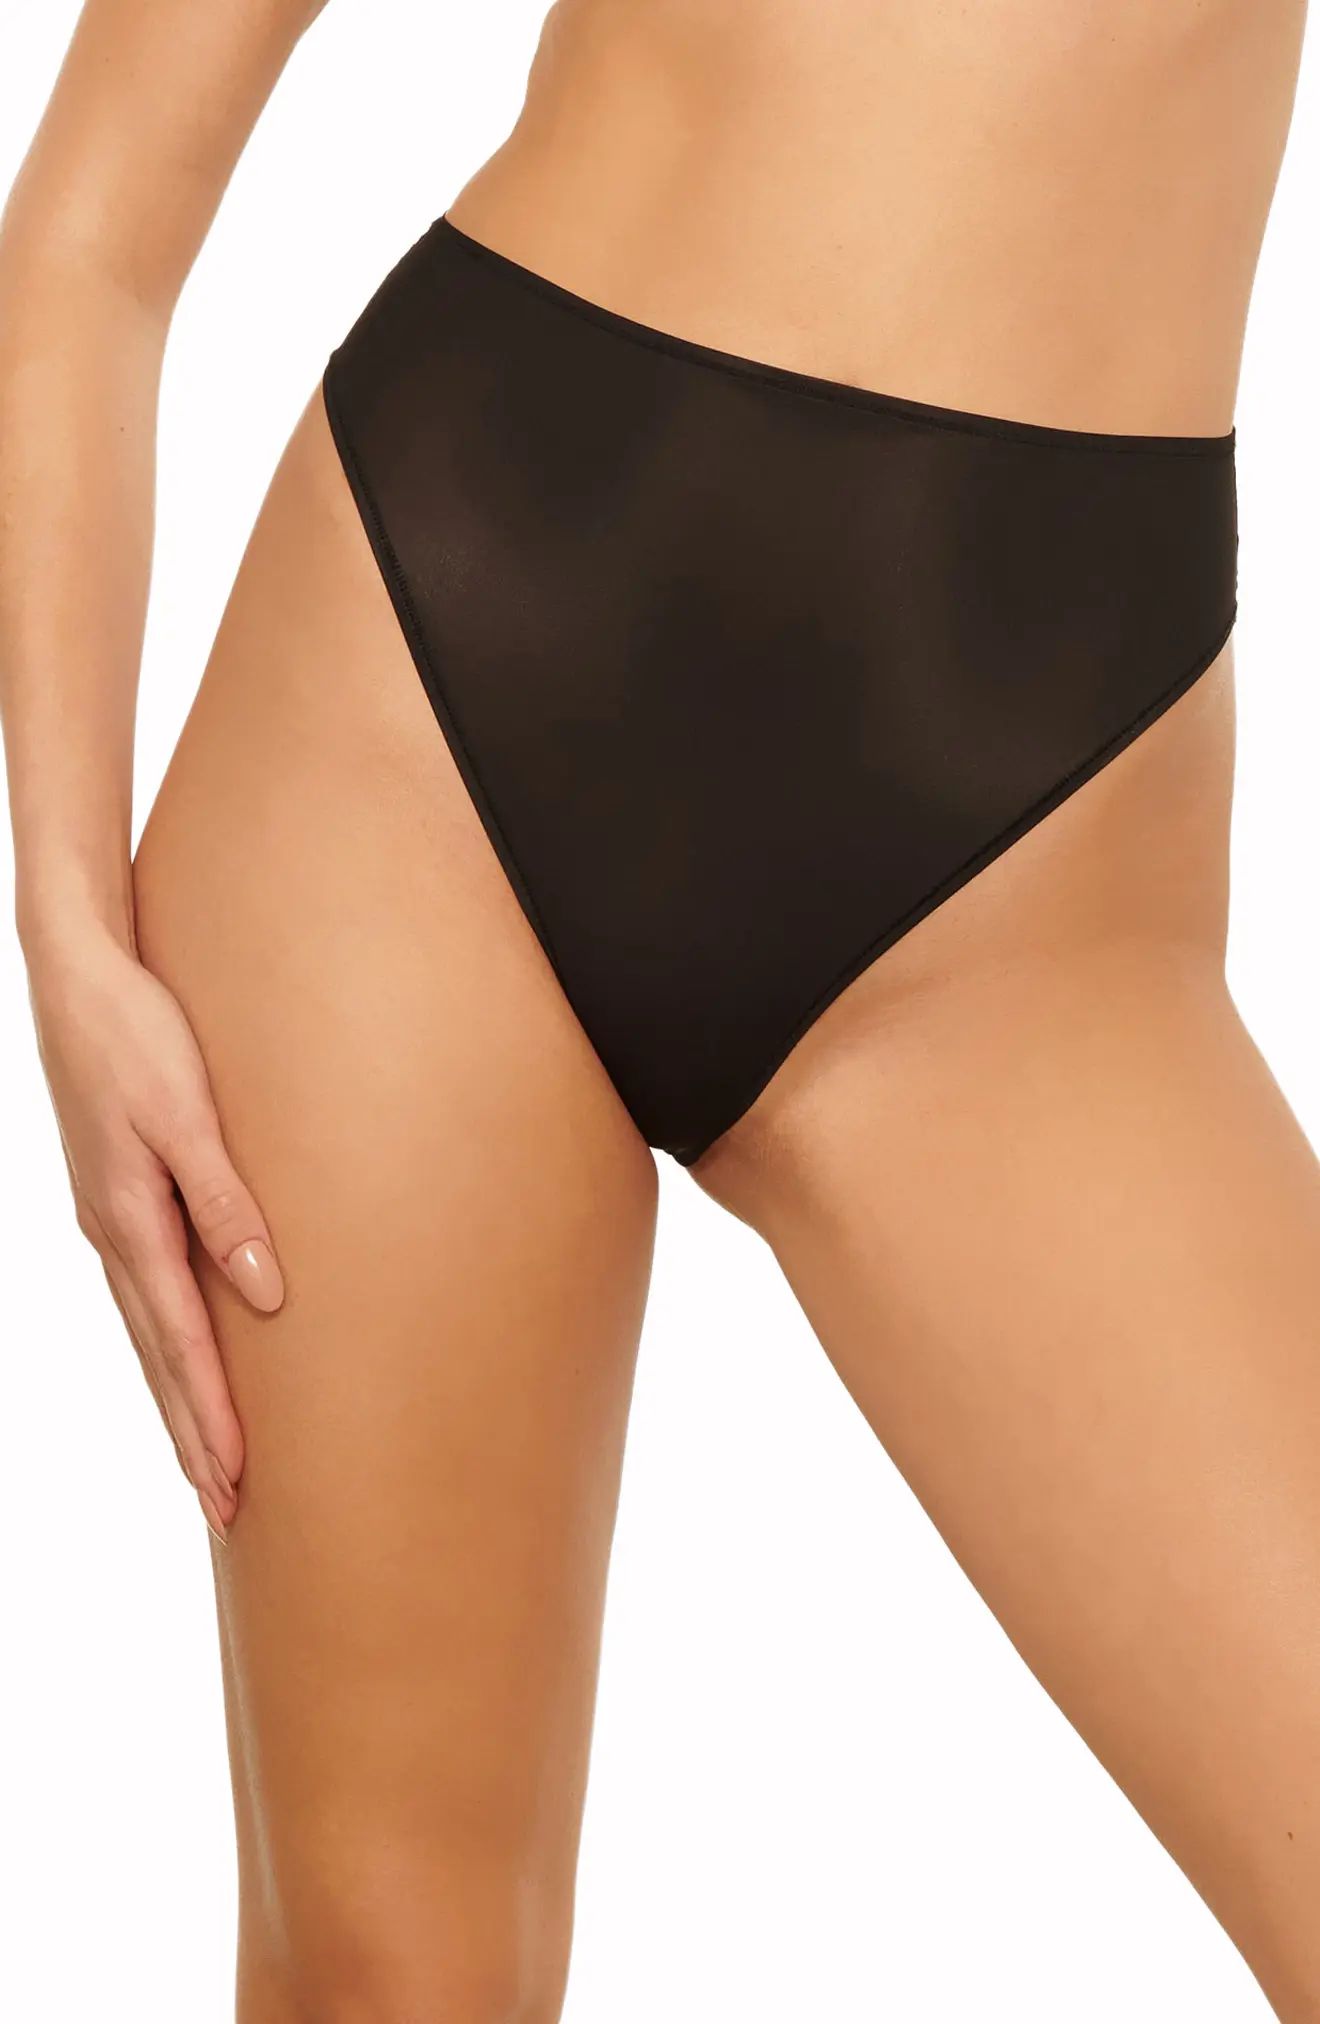 Plus Size Women's Skims Jelly Sheer Cheeky Briefs, Size 3 X - Black | Nordstrom